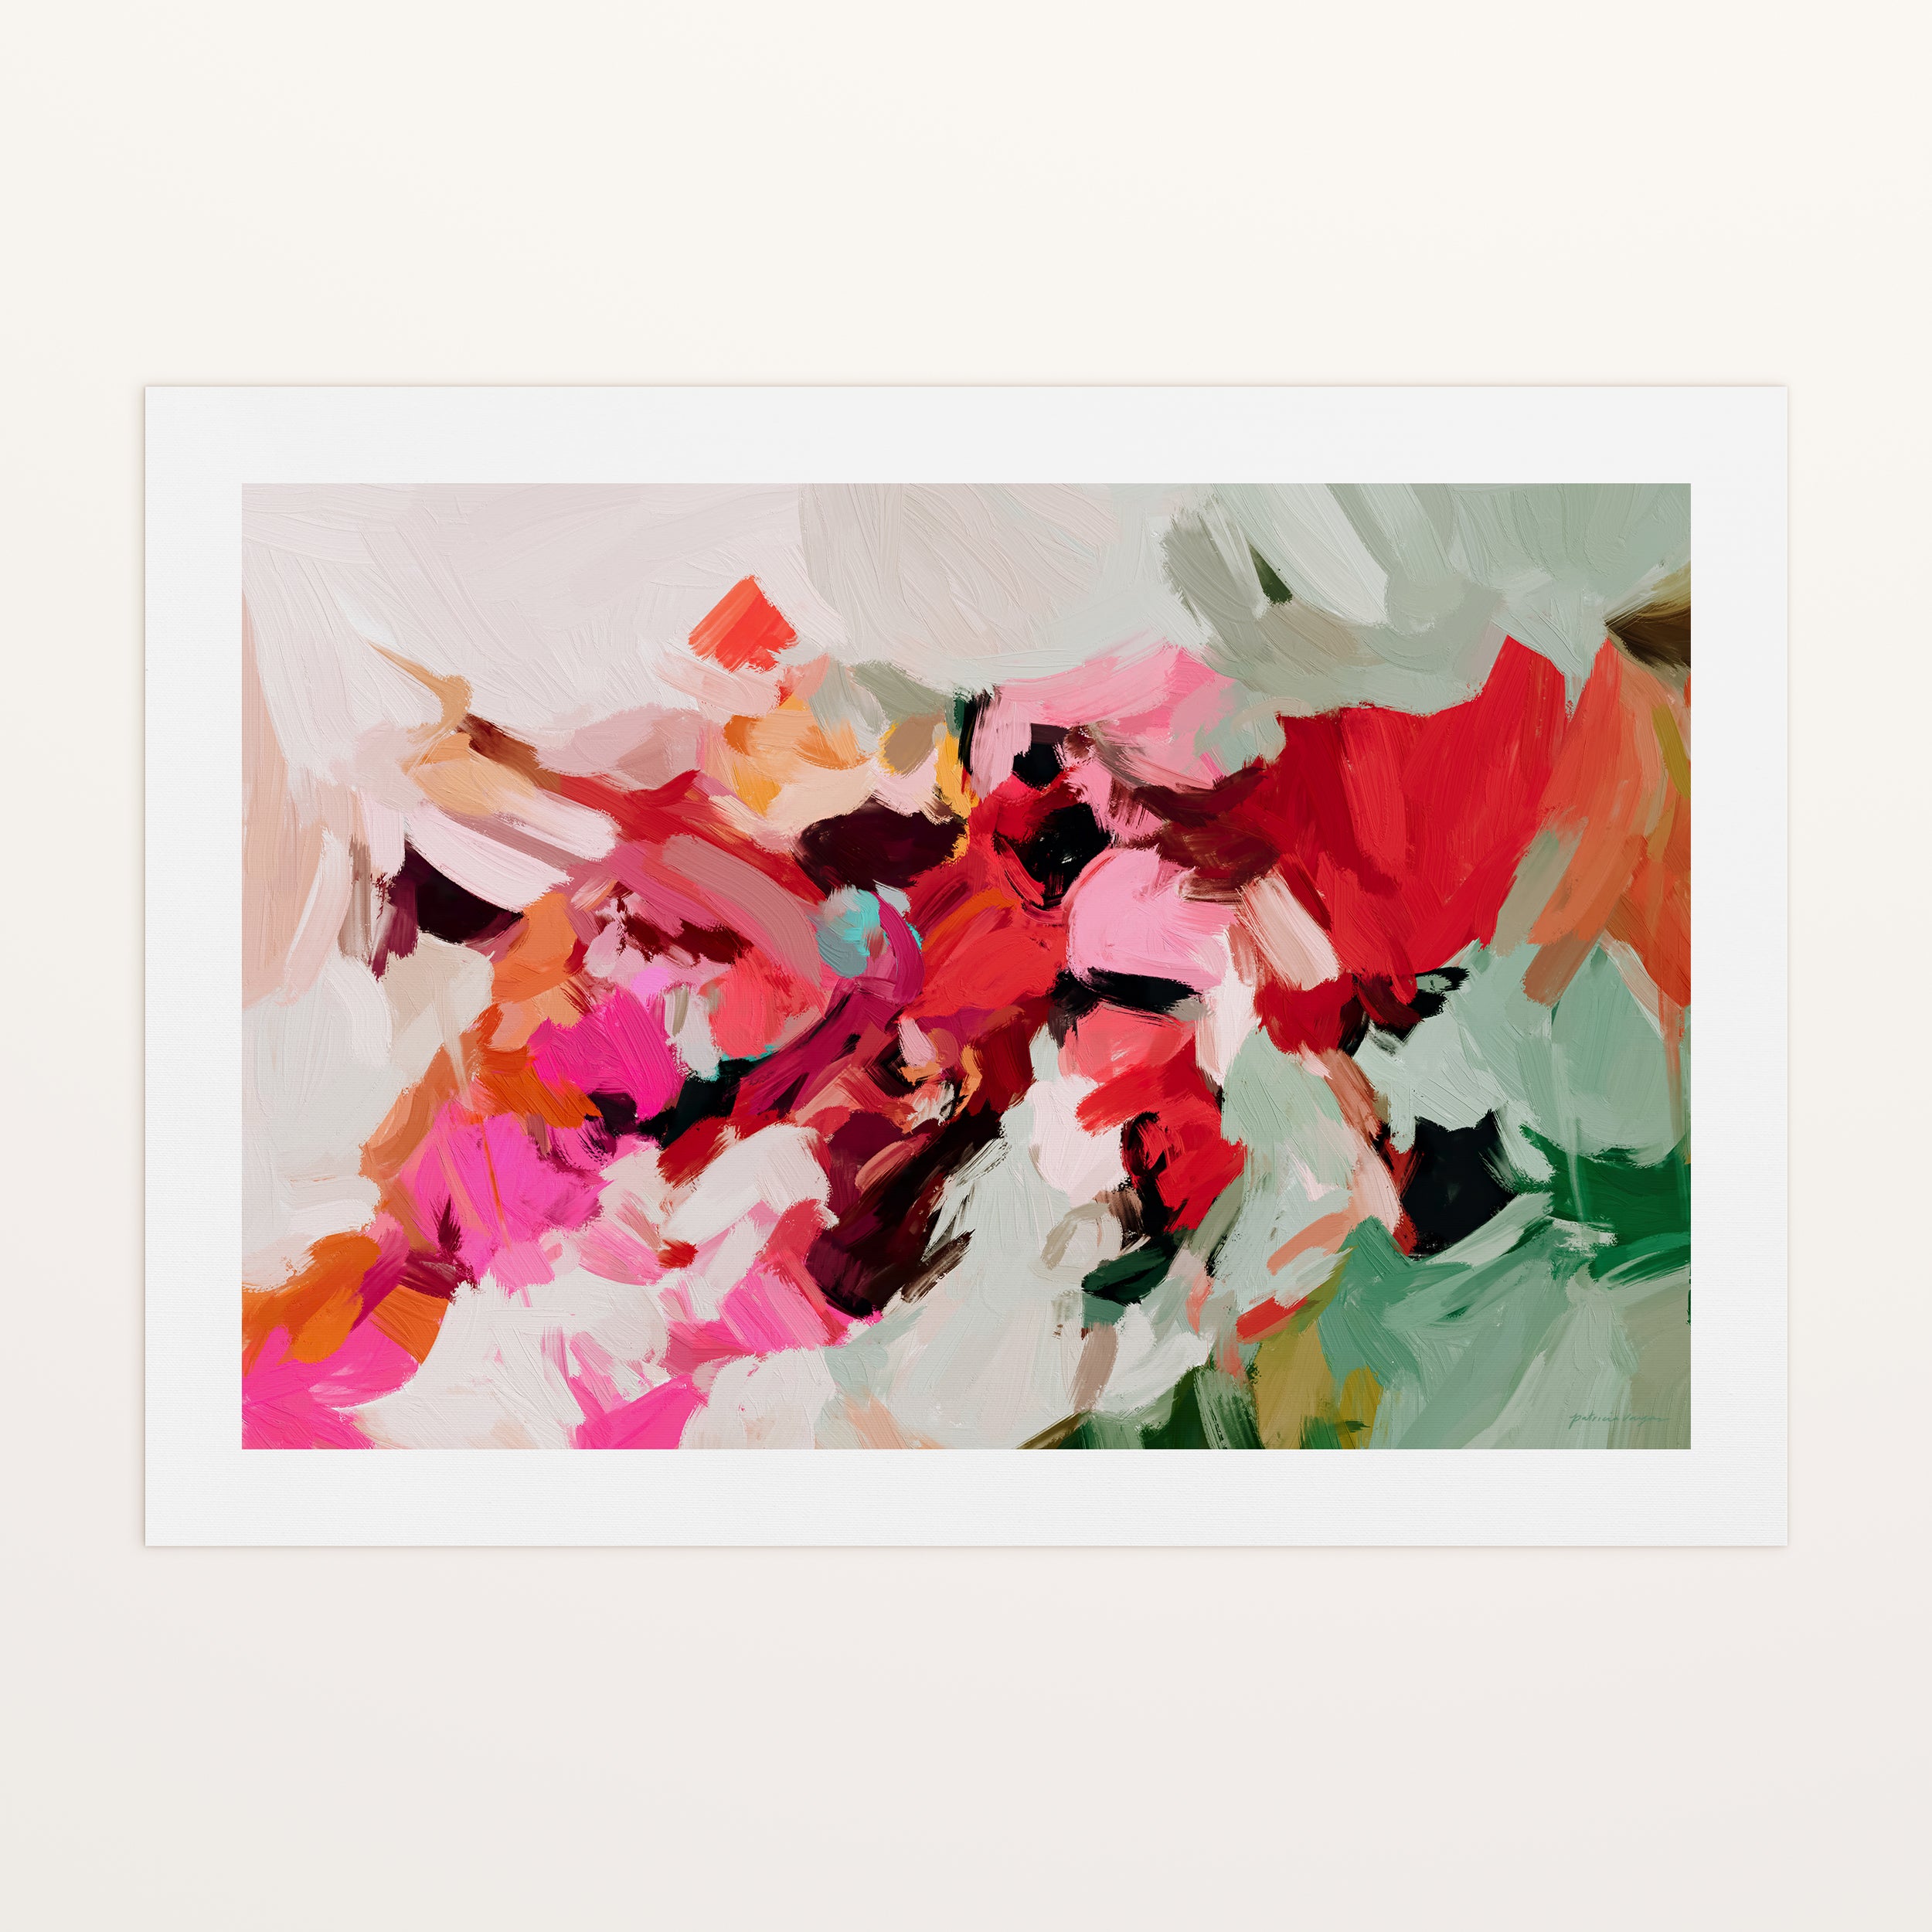 Garnet, pink and green colorful abstract canvas wall art print by Parima Studio